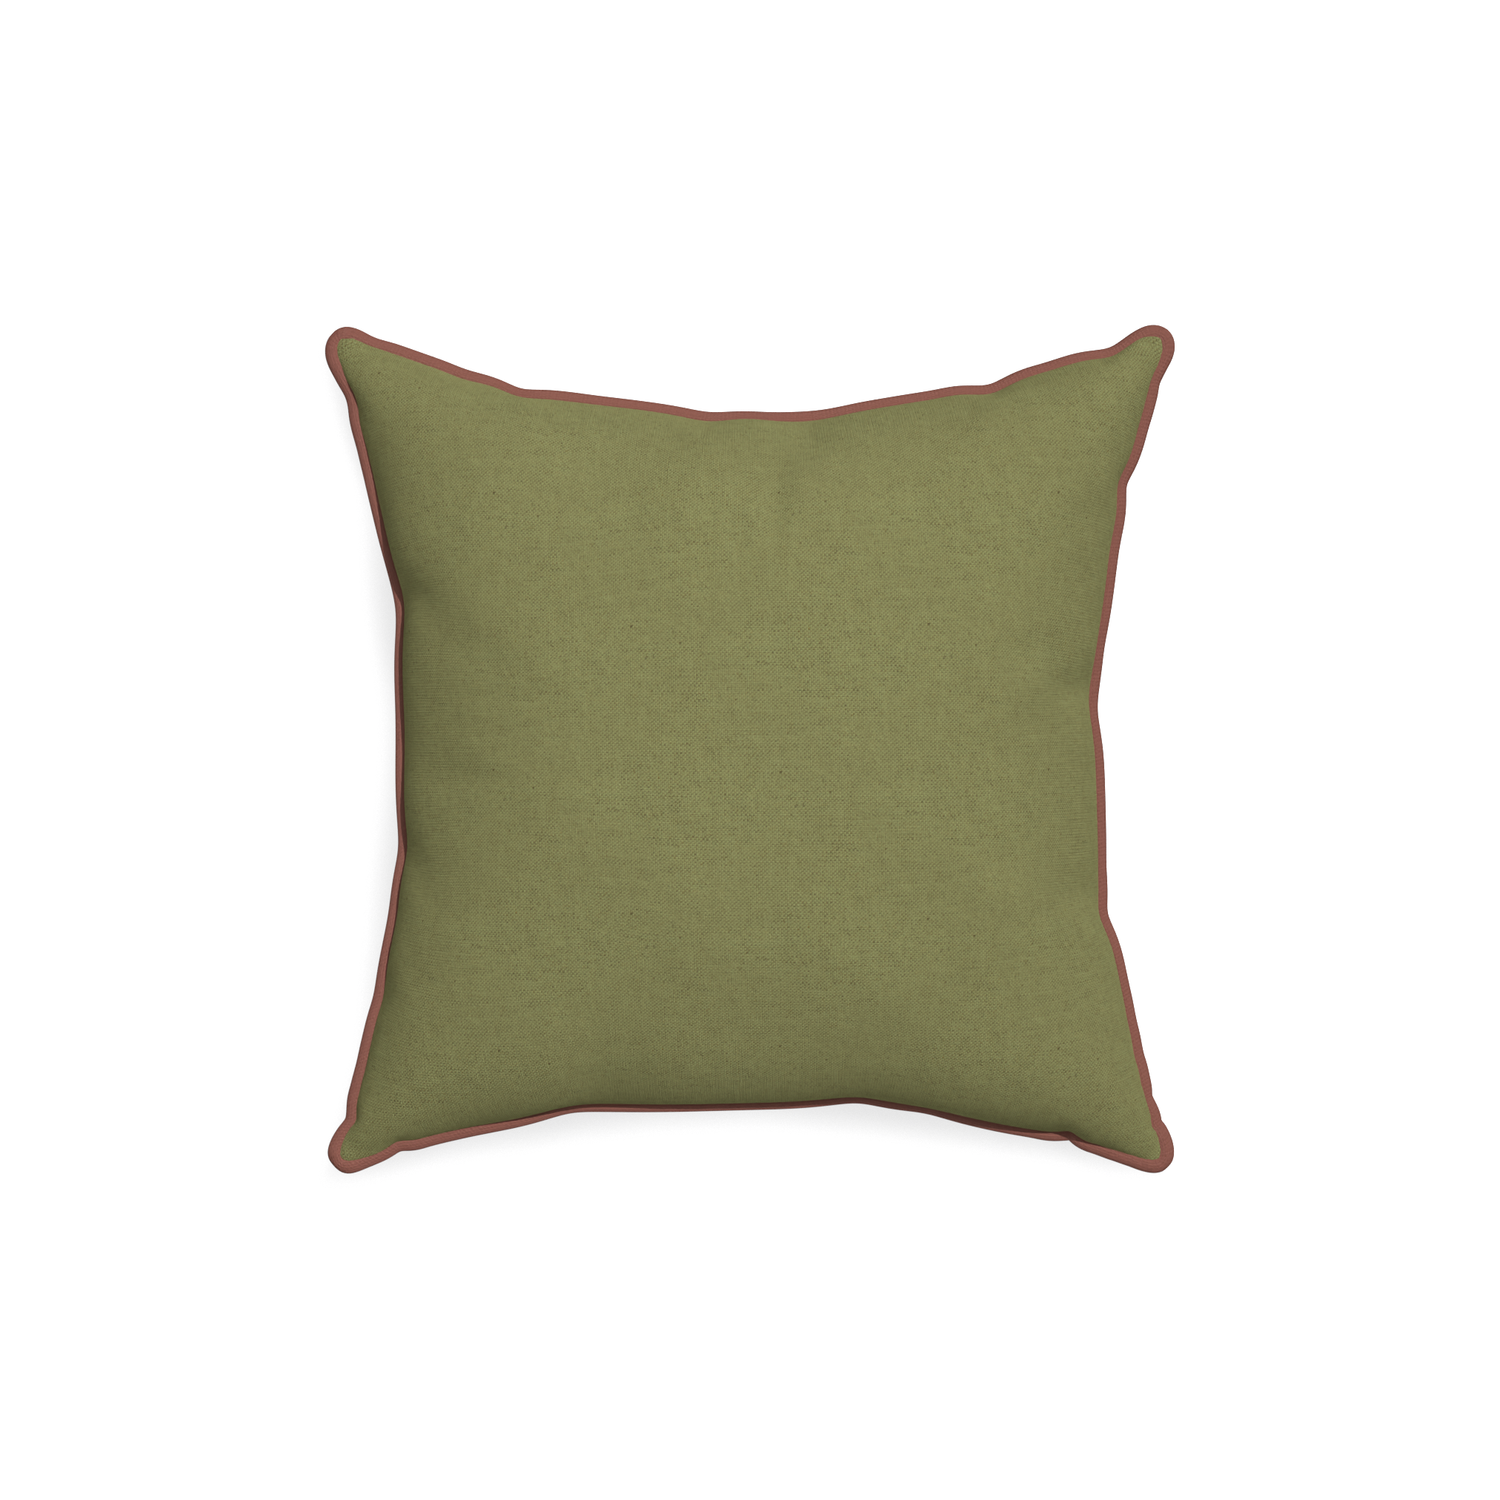 18-square moss custom moss greenpillow with w piping on white background